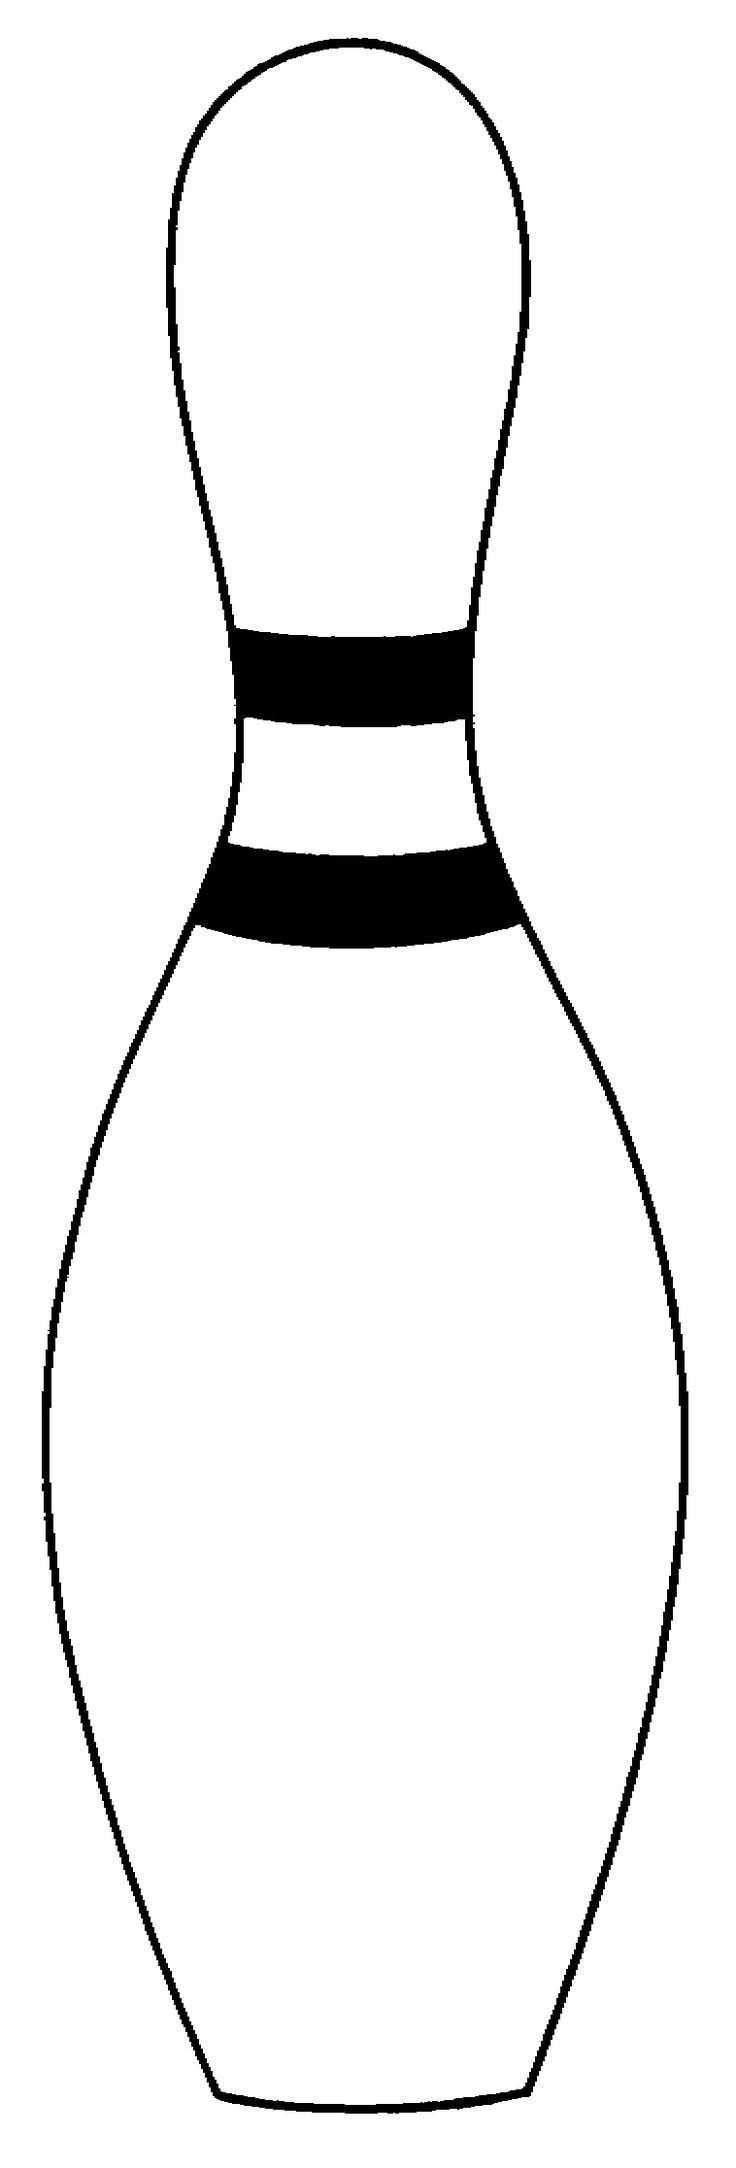 Picture Of A Bowling Pin Cliparts Co Bowling Party Bowling Pins Bowling Party Themes